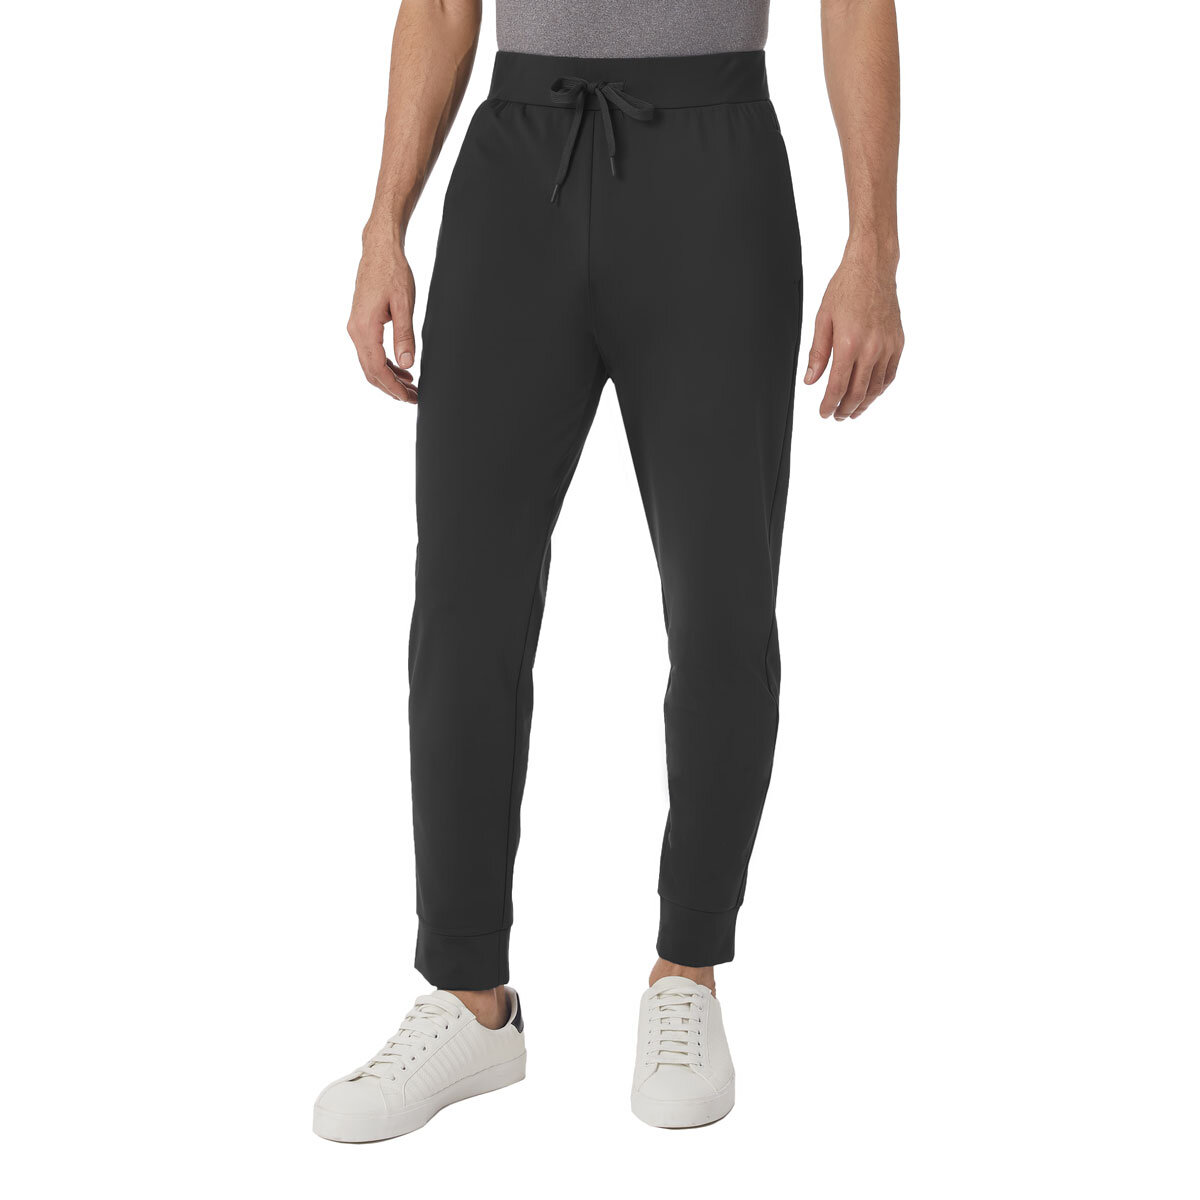 REVIEW: COSTCO 32 DEGREES - HEAT Tech Jogger Pant & COOL Quick Dry Shirt 